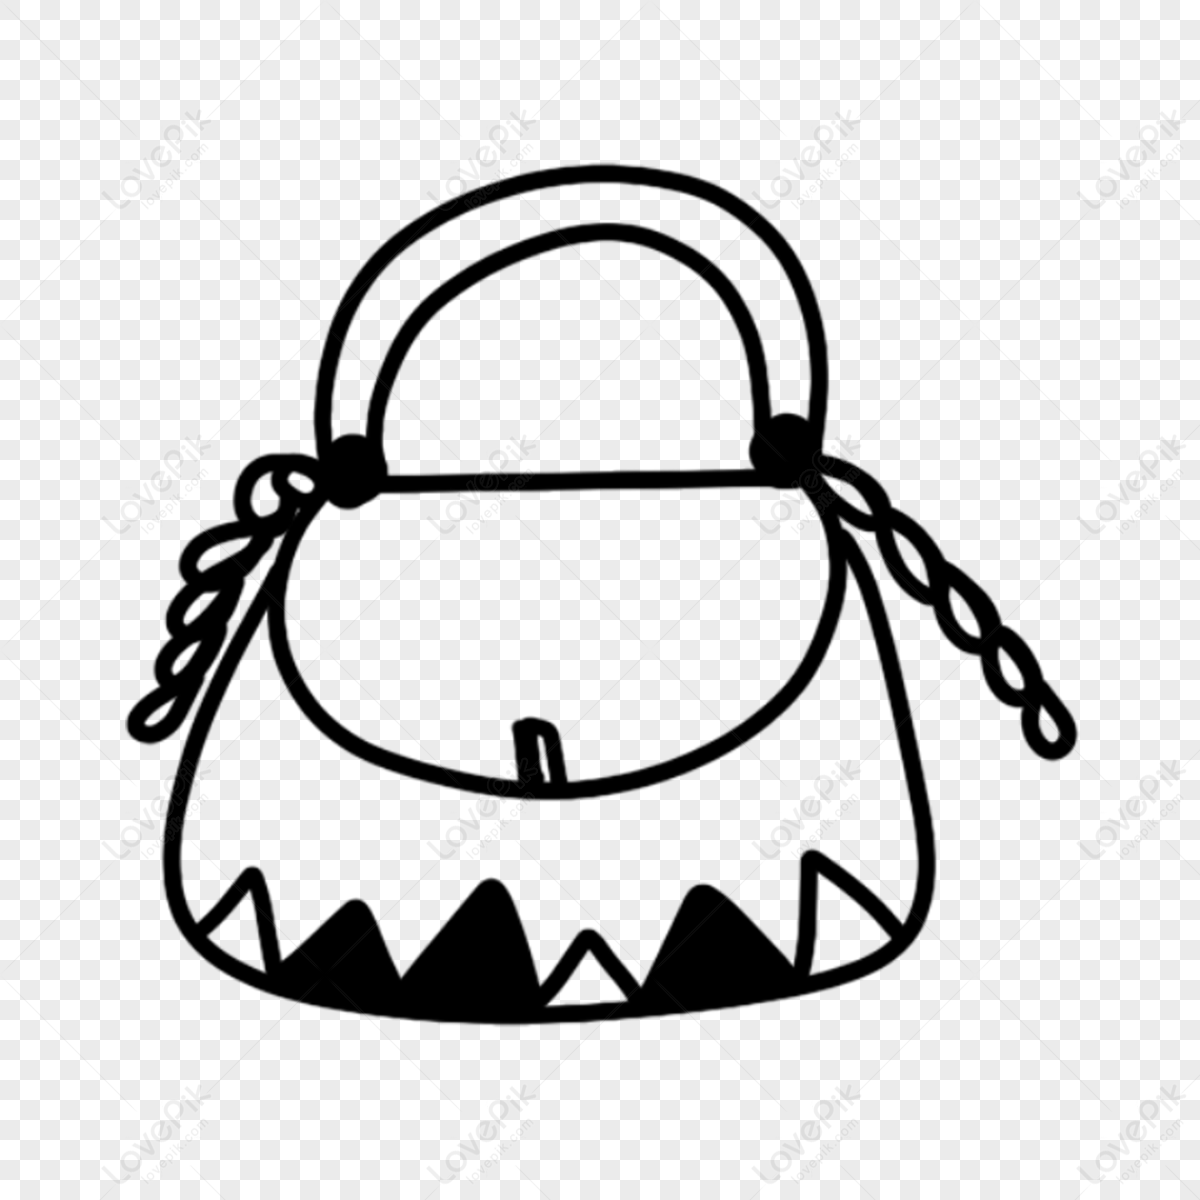 How to draw LADIES PURSE - YouTube